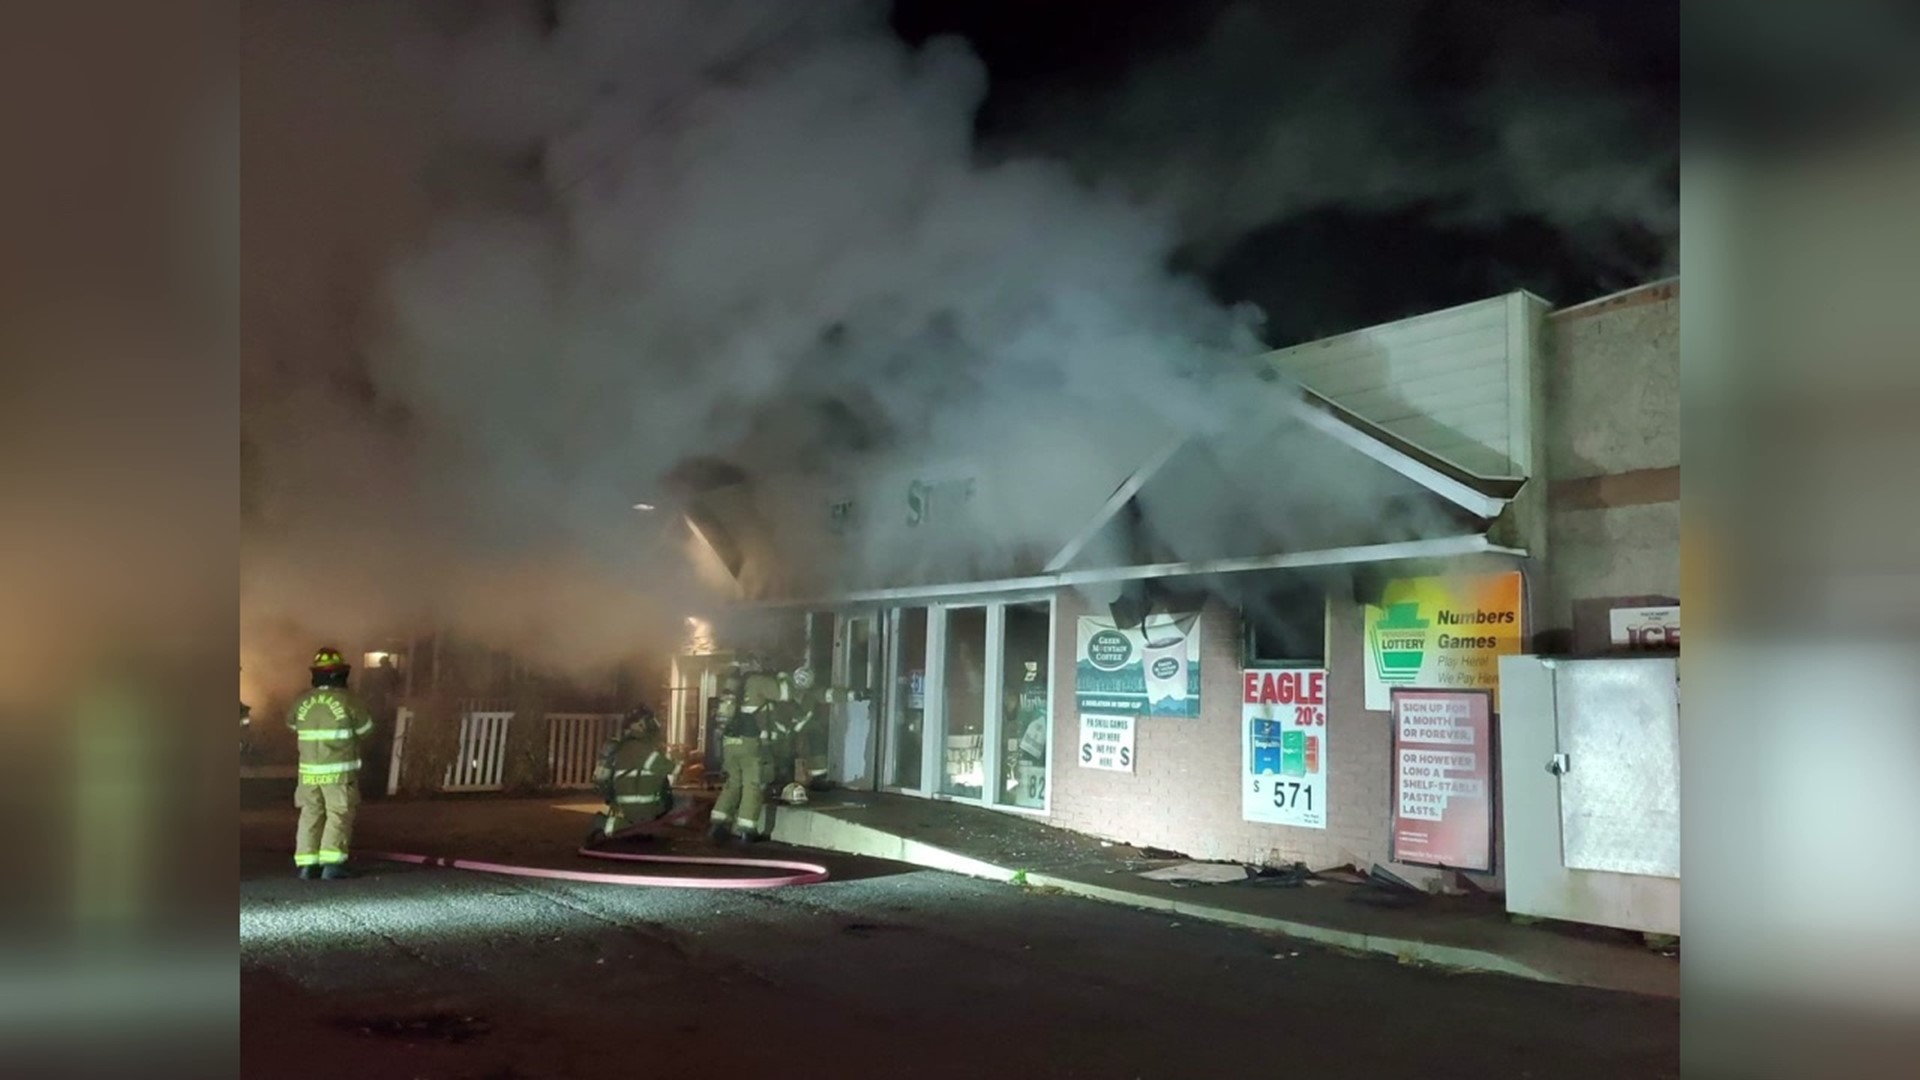 Fire officials say the General Store sparked fire just before 2 a.m.